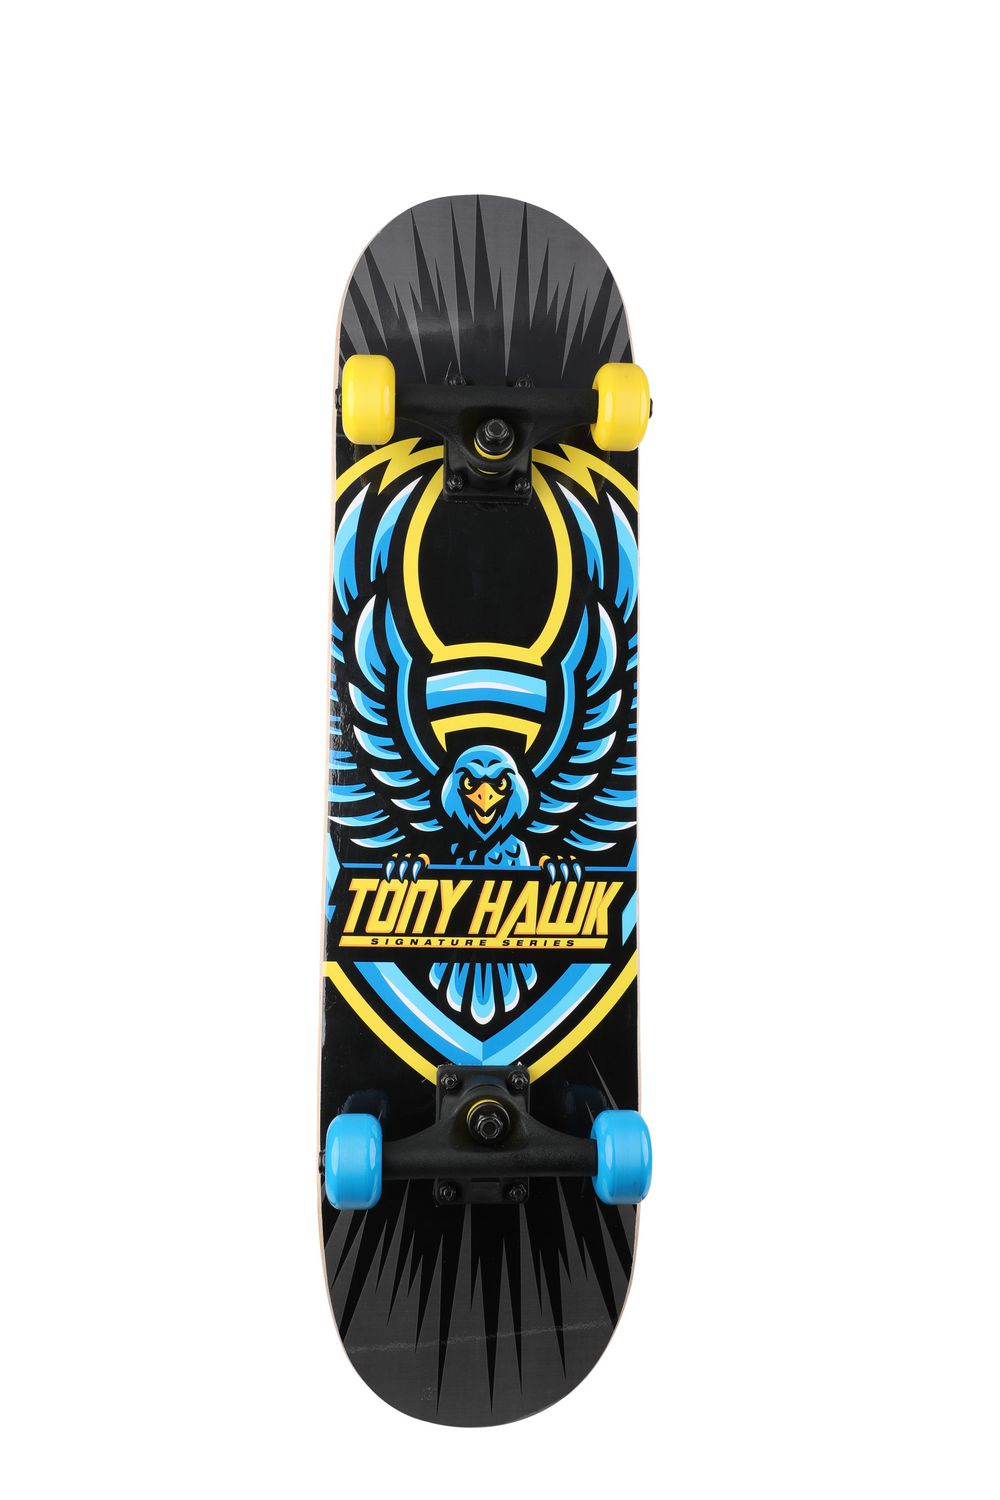 Details about   Tony Hawk 31" Popsicle Space Hawk Skateboard With Pro Trucks And ABEC1 Bearings 